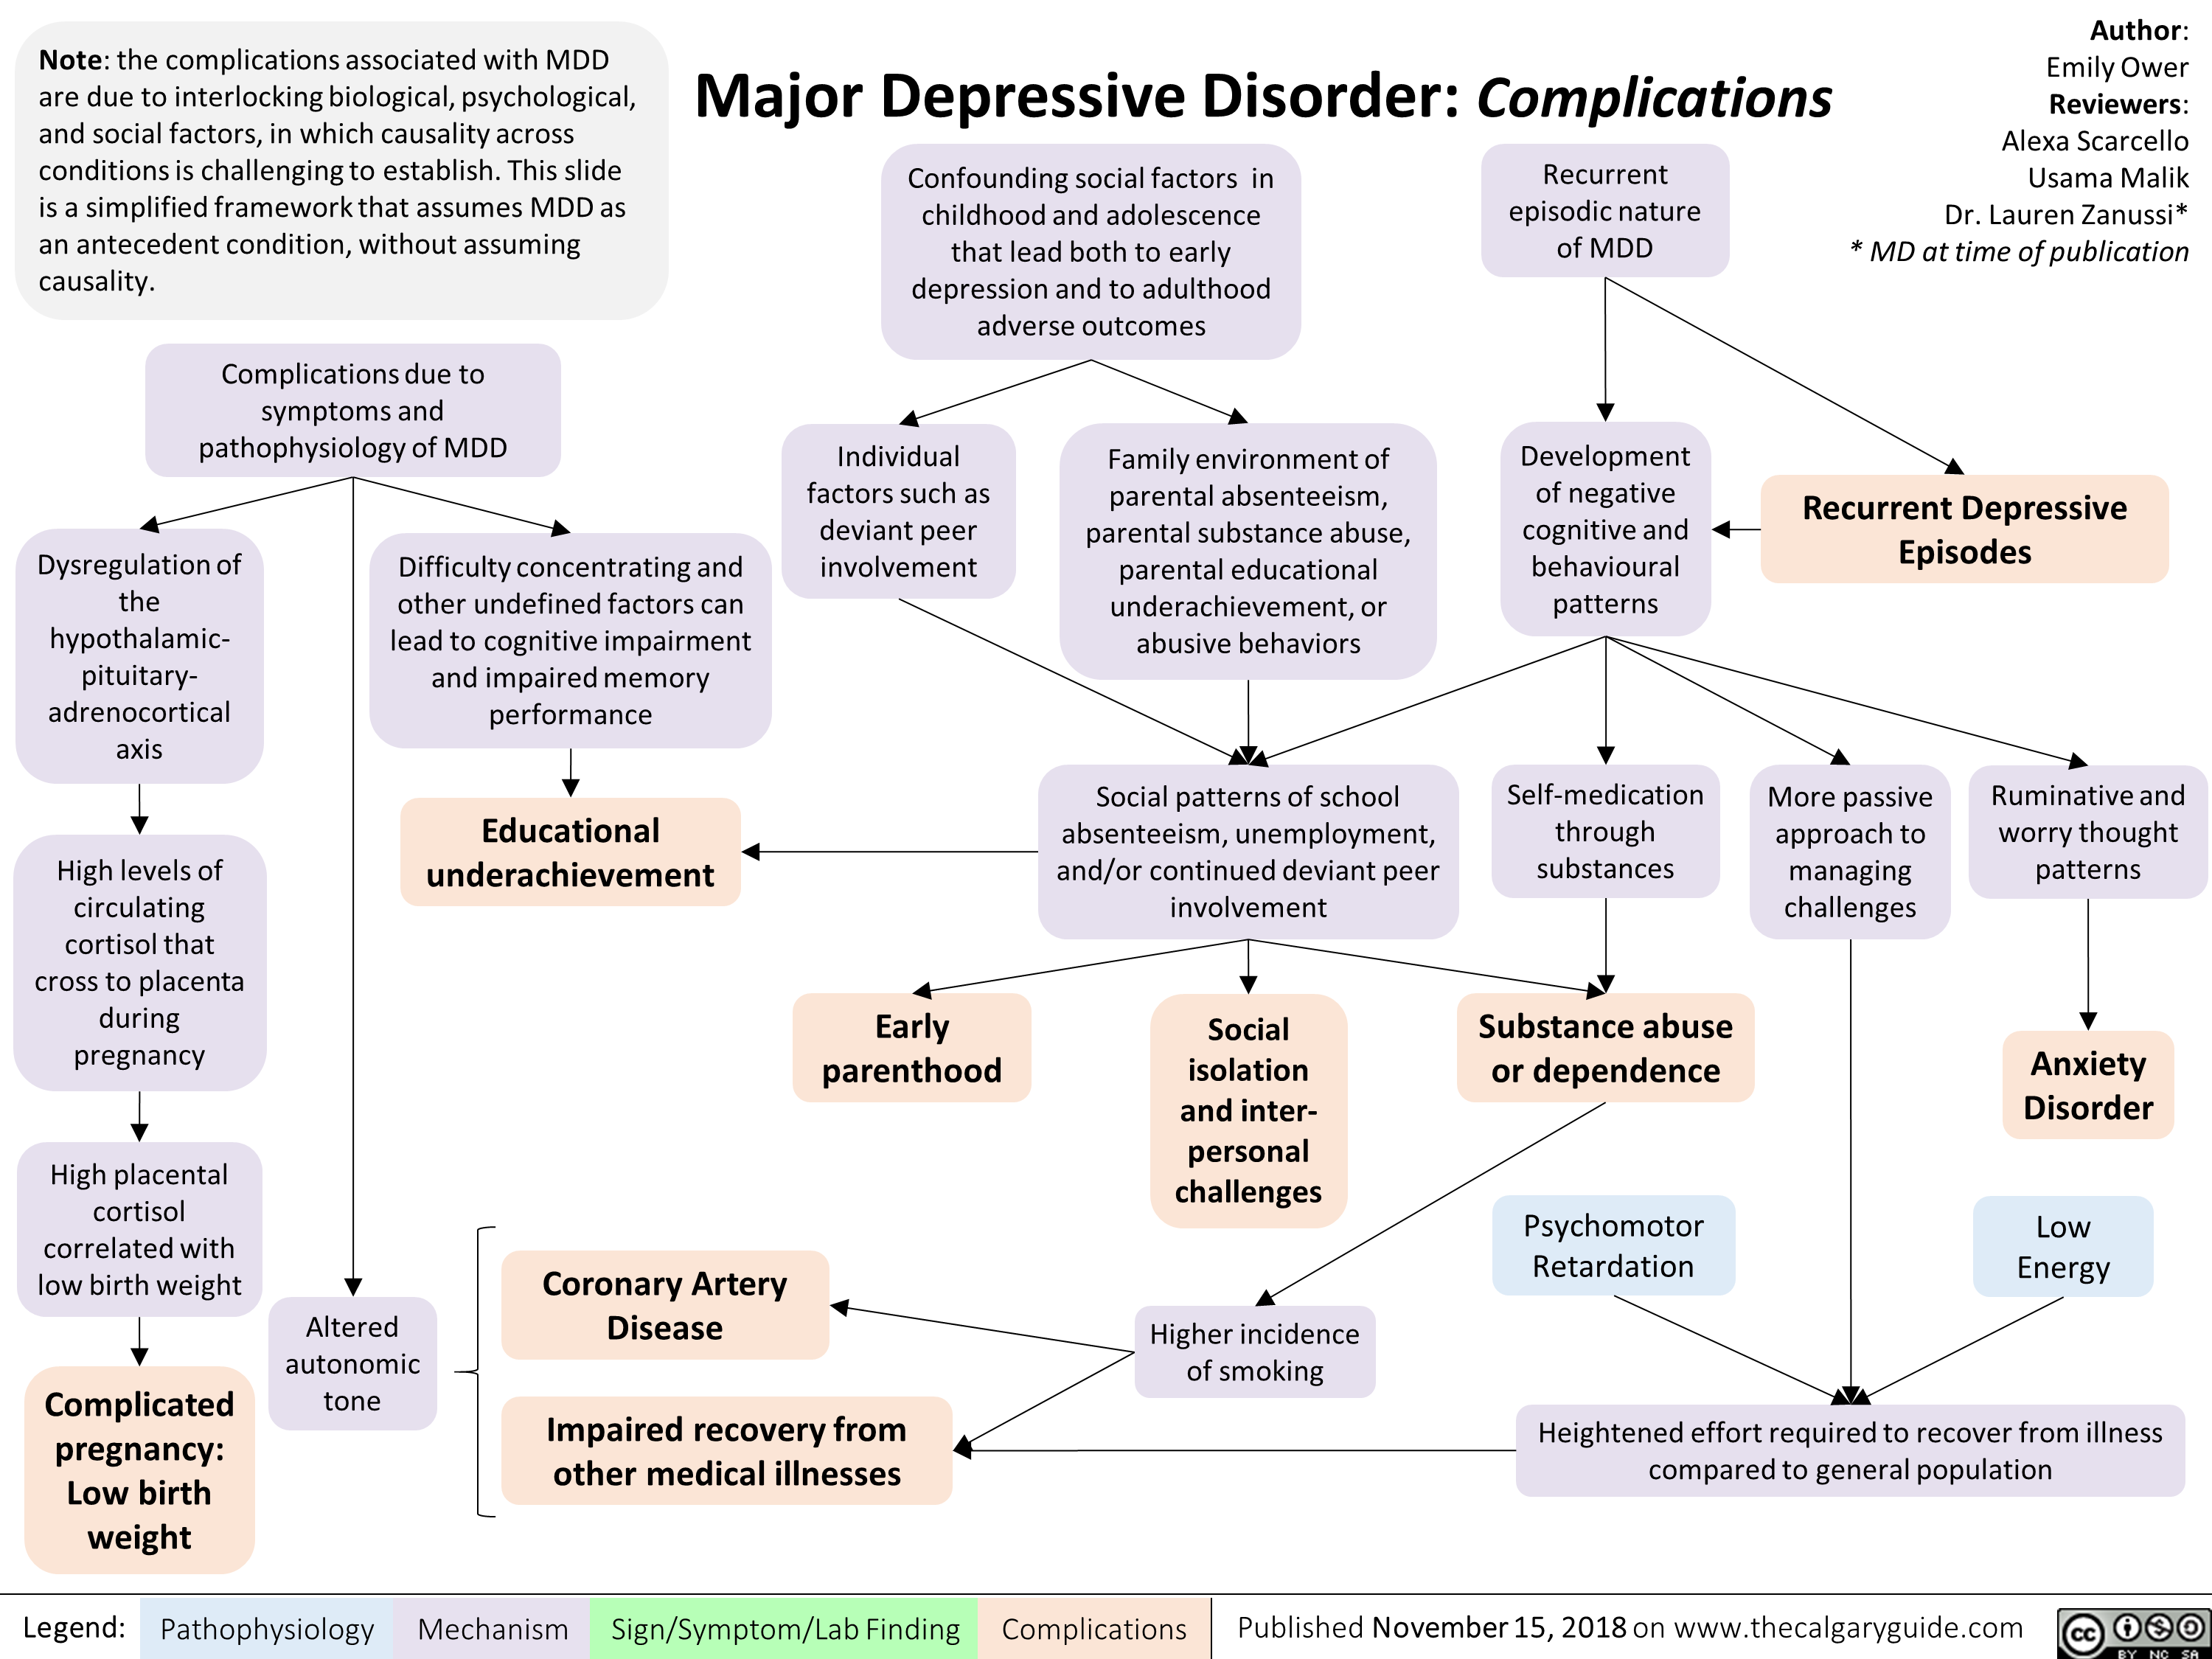 Note: the complications associated with MDD are due to interlocking biological, psychological, and social factors, in which causality across conditions is challenging to establish. This slide is a simplified framework that assumes MDD as an antecedent condition, without assuming causality. 
Major Depressive Disorder: Complications 
Confounding social factors in childhood and adolescence that lead both to early depression and to adulthood adverse outcomes 
Complications due to symptoms and pathophysiology of MDD Individual factors such as deviant peer Dysregulation of Difficulty concentrating and involvement the other undefined factors can hypothalamic-pituitary-adrenocortical axis lead to cognitive impairment and impaired memory performance Educational High levels of circulating underachievement cortisol that cross to placenta during pregnancy Early parenthood • High placental cortisol correlated with low birth weight Coronary Artery Altered Disease autonomic Complicated tone pregnancy: Impaired recovery from   Low birth weight other medical illnesses 
Legend: 
Pathophysiology Mechanism 
Sign/Symptom/Lab Finding 
Family environment of parental absenteeism, parental substance abuse, parental educational underachievement, or abusive behaviors 
Recurrent episodic nature of MDD 
Development of negative cognitive and behavioural patterns 
Author: Emily Ower Reviewers: Alexa Scarcello Usama Malik Dr. Lauren Zanussi* * MD at time of publication 
Recurrent Depressive Episodes 

Social patterns of school absenteeism, unemployment, and/or continued deviant peer involvement 
Social isolation and inter-personal challenges 
Higher incidence of smoking 
Self-medication through substances 
Substance abuse or dependence 
Psychomotor Retardation 
Complications 
More passive approach to managing challenges 

Ruminative and worry thought patterns 
Anxiety Disorder 
Low Energy 
Heightened effort required to recover from illness compared to general population 